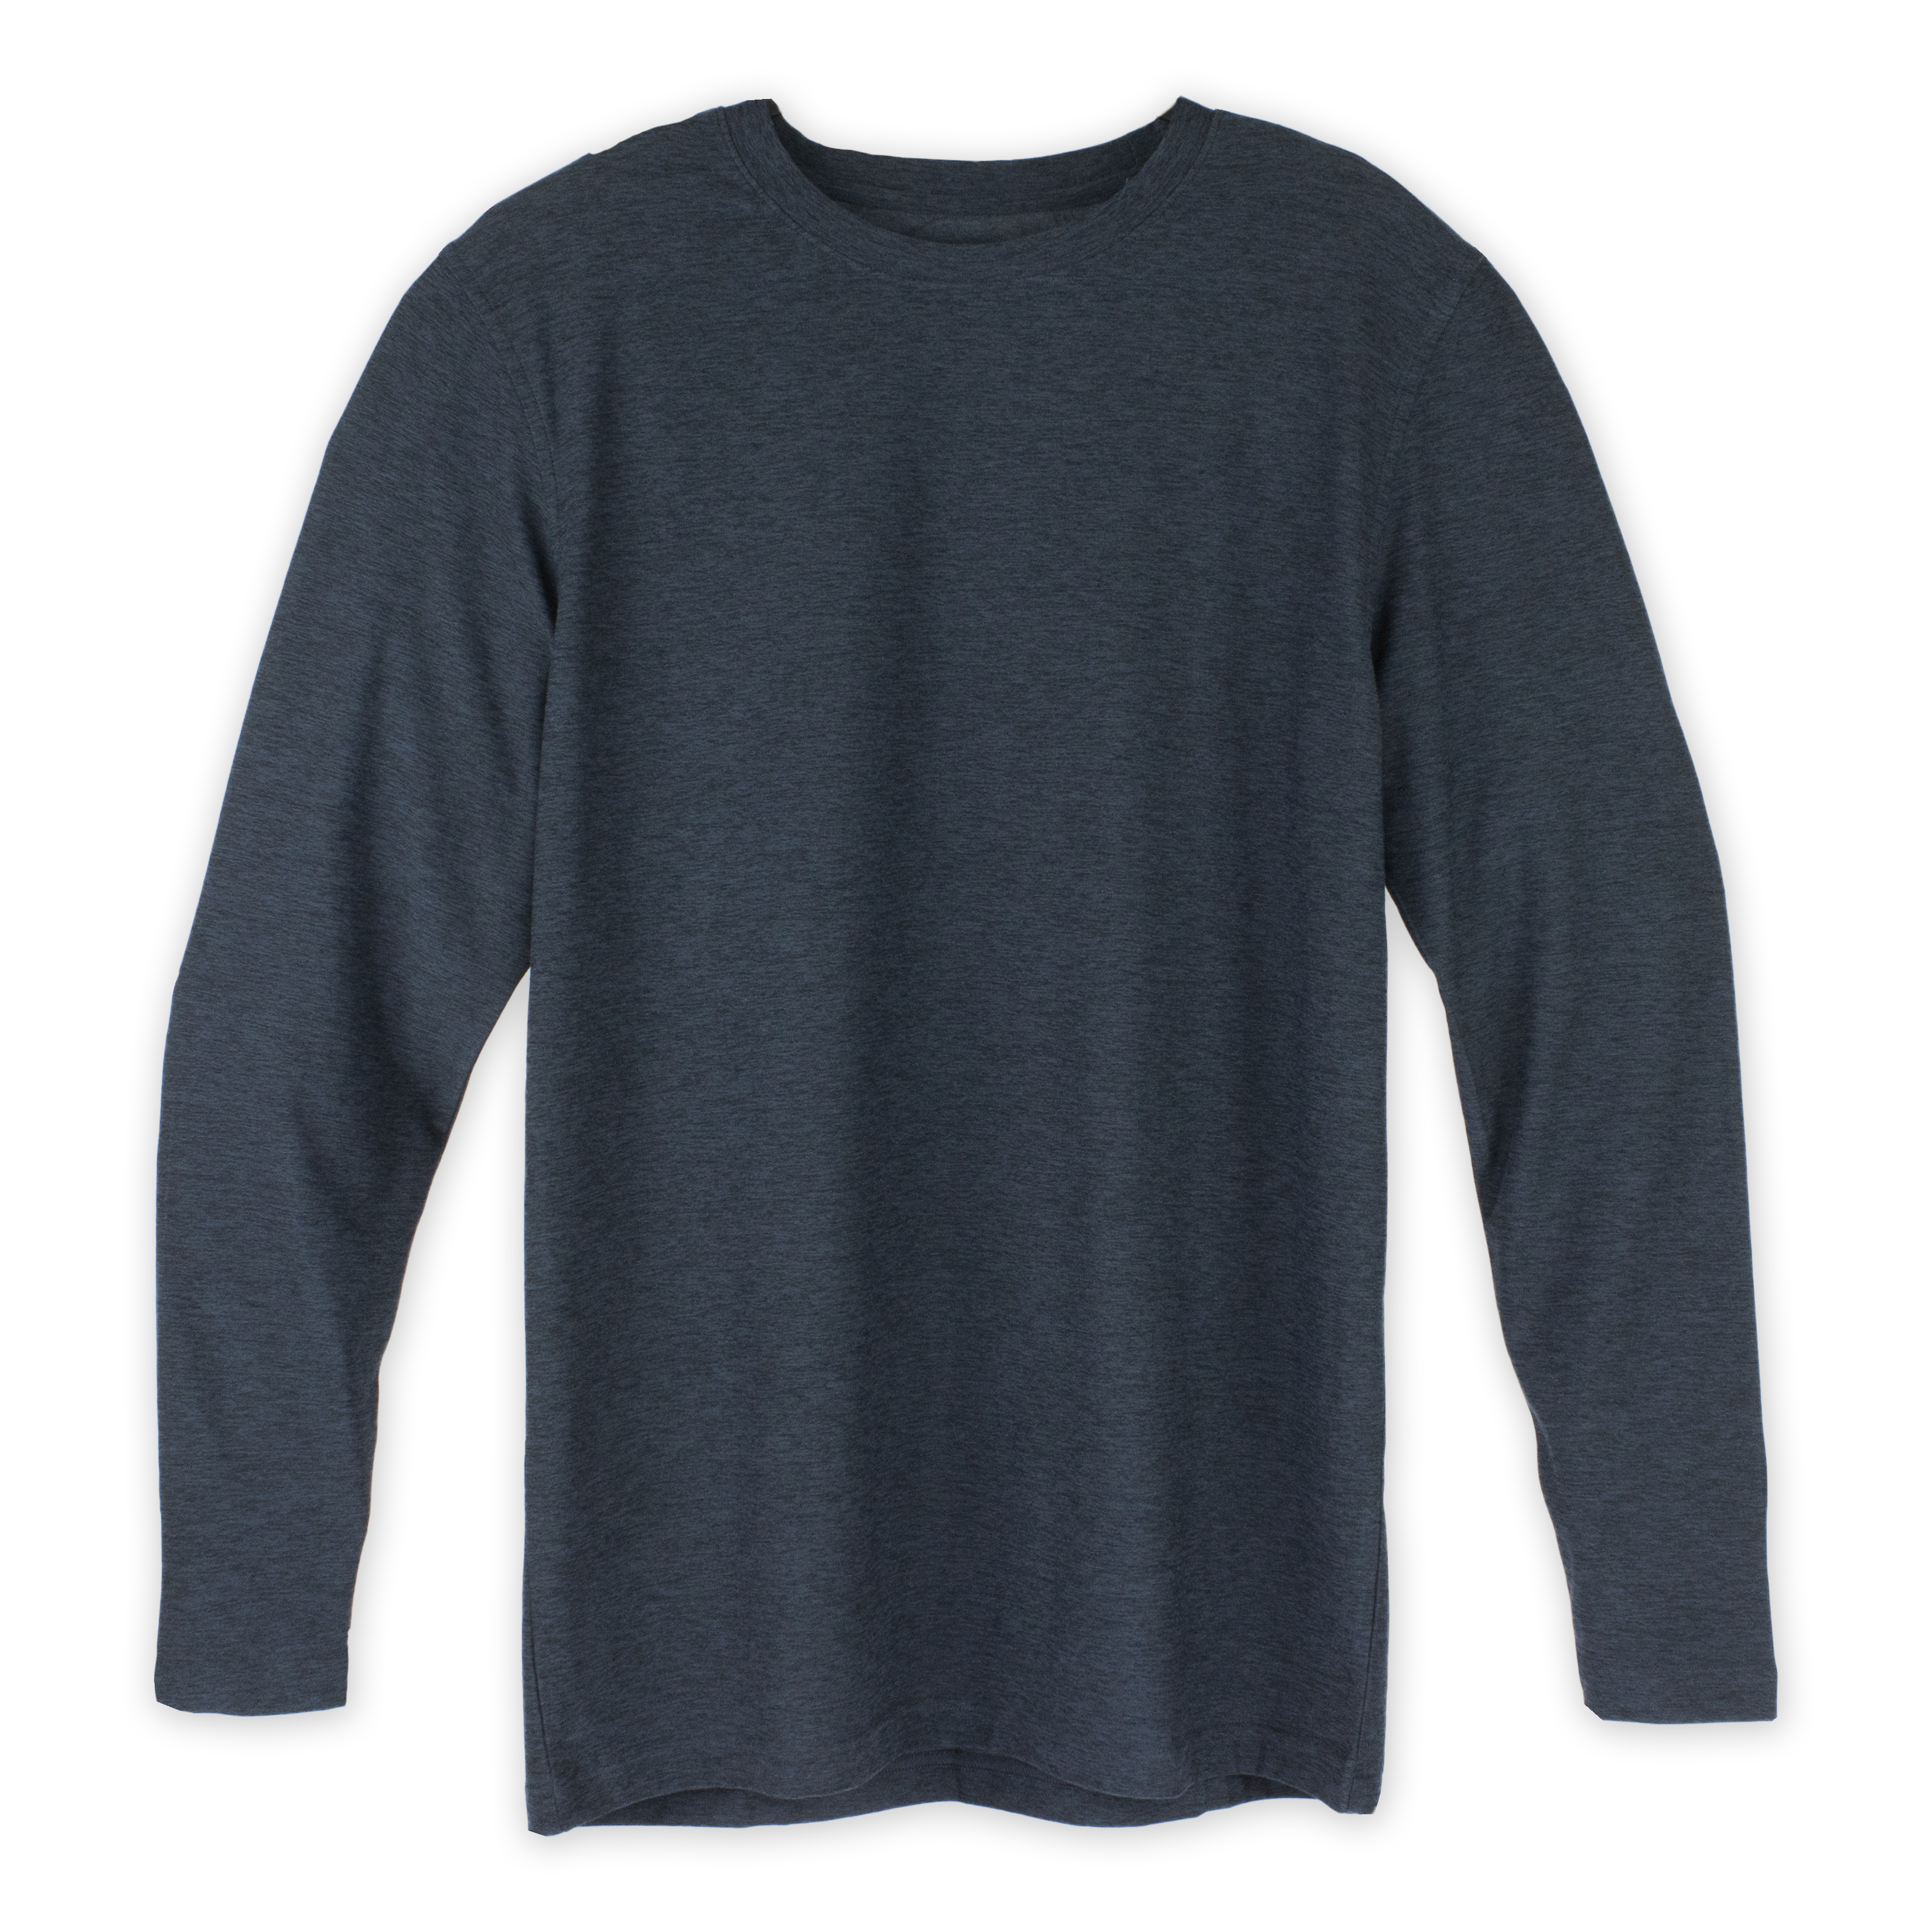 Long Sleeve Tech Tee Navy blue front with crewneck and heathered color